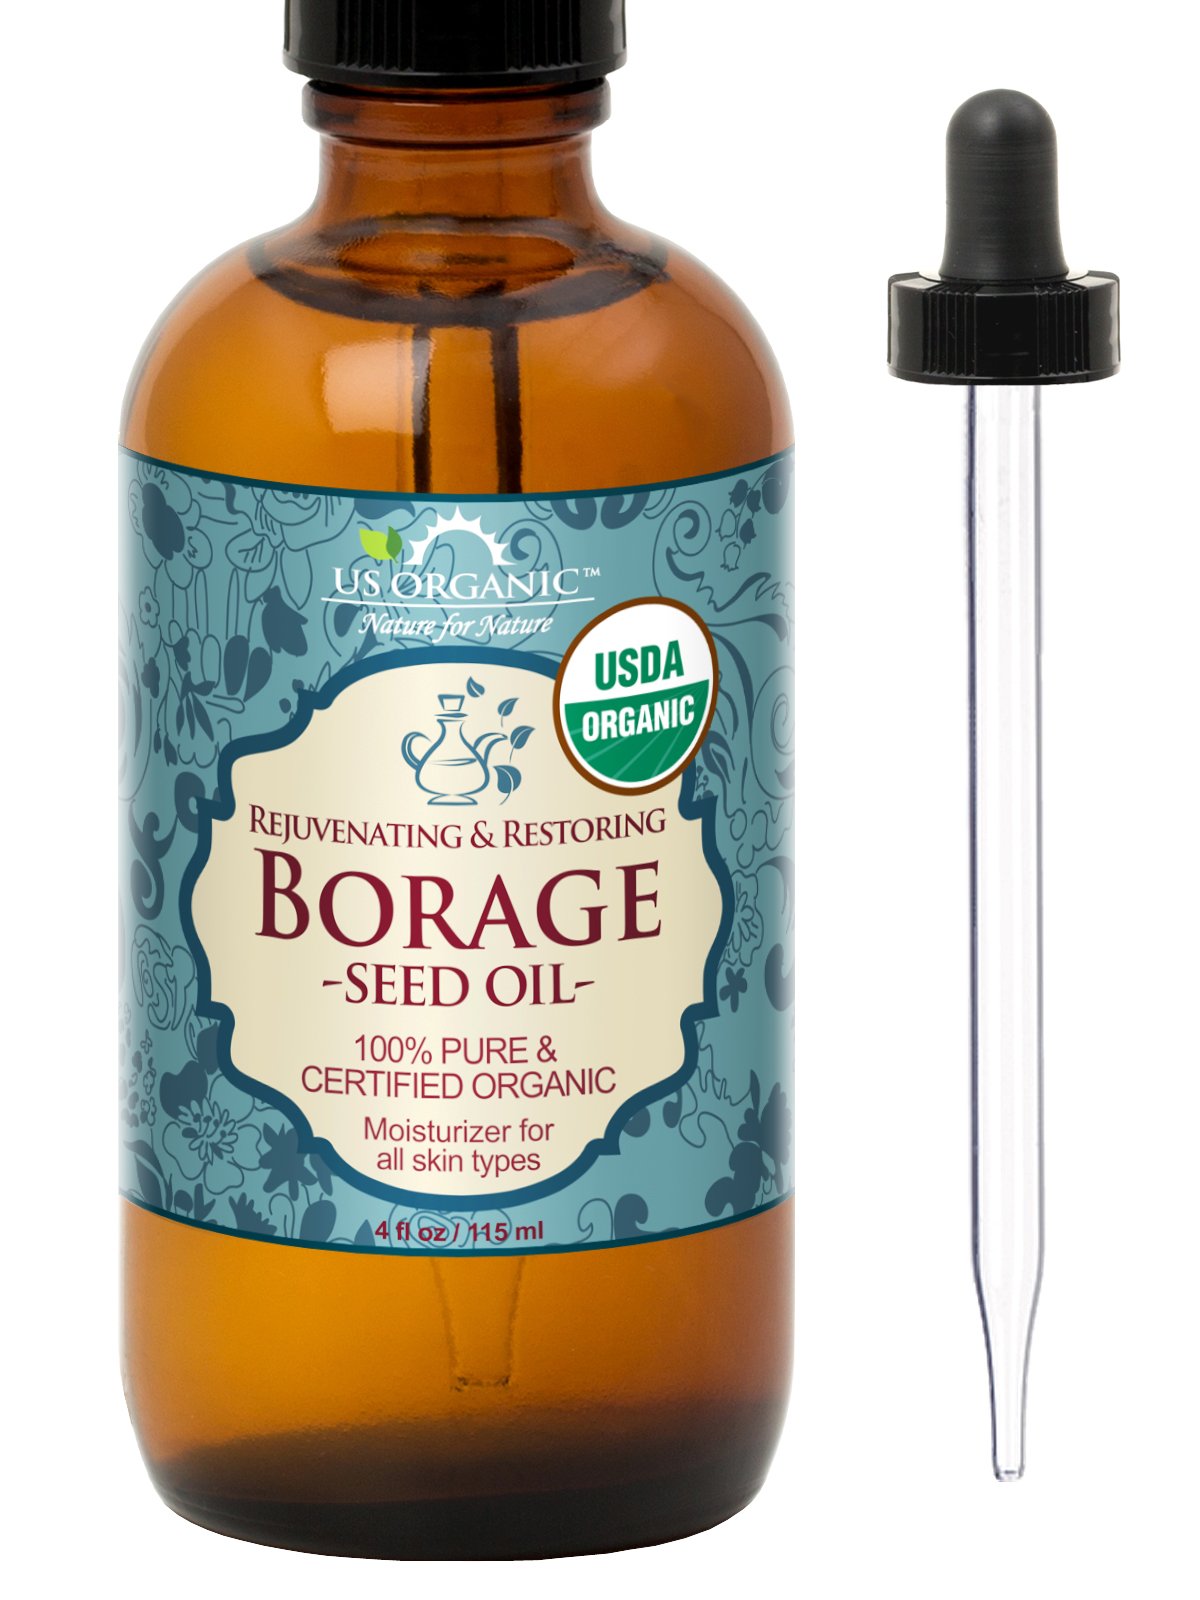 US Organic Borage seed Oil (18% GLA), USDA Certified Organic, 100% Pure & Natural, Cold Pressed, aka Starflower oil, in Amber Glass Bottle w/Glass Eye dropper for Easy Application (4 oz (115 ml))